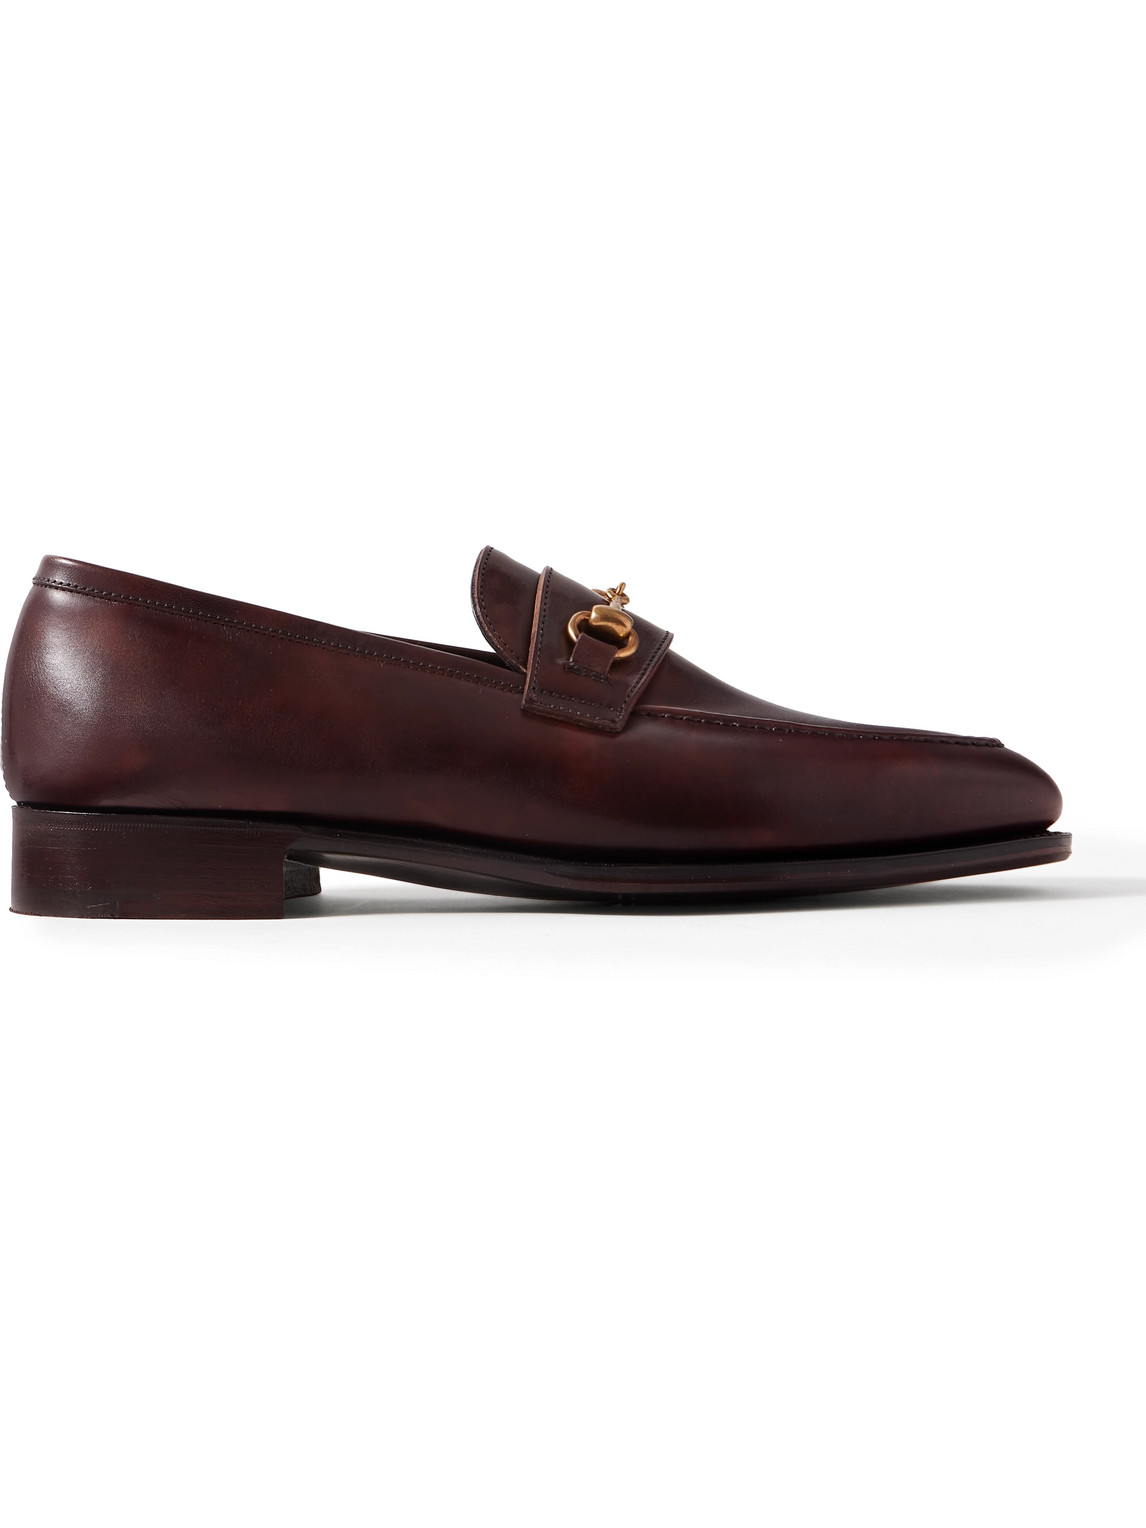 GEORGE CLEVERLEY COLONY HORSEBIT LEATHER LOAFERS